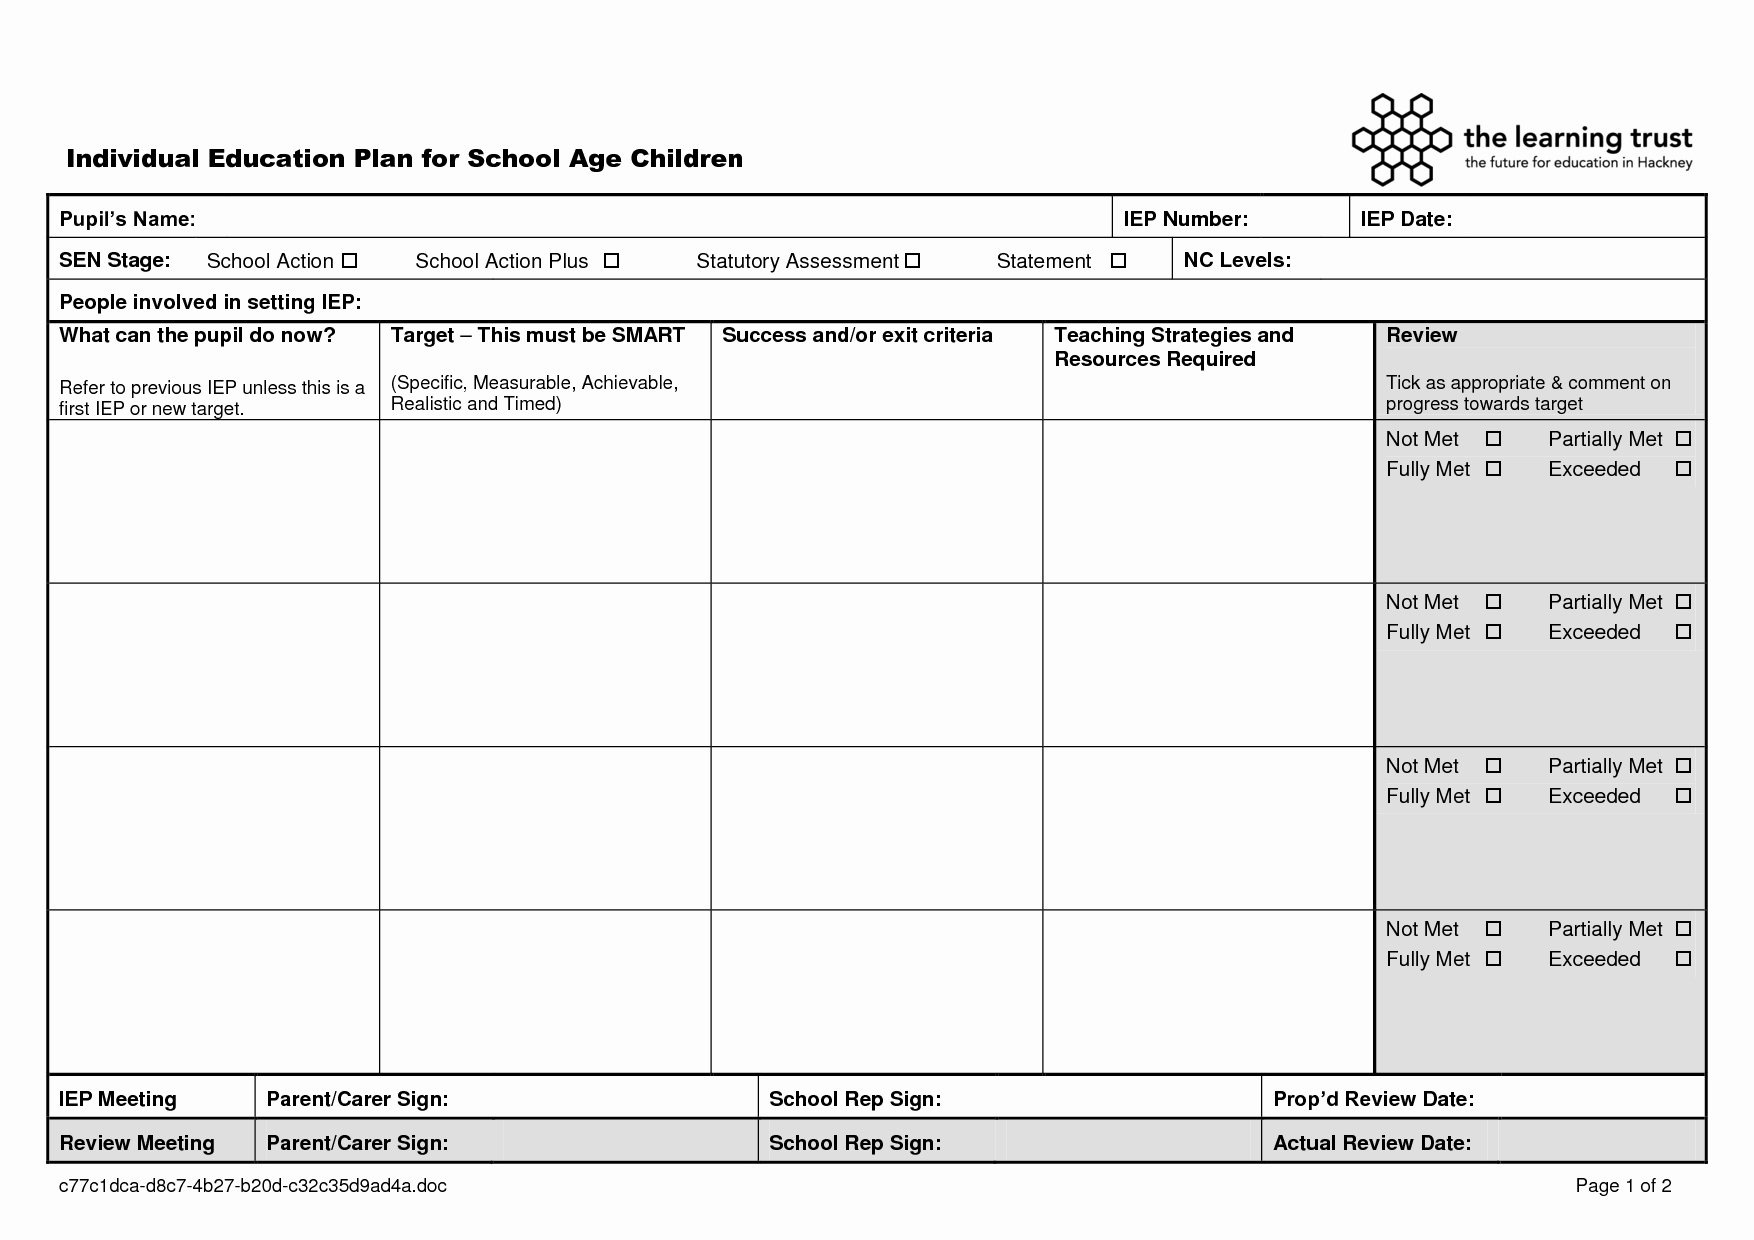 Personal Learning Plan Template Awesome Individualized Education Plan Template Individual Education Plan